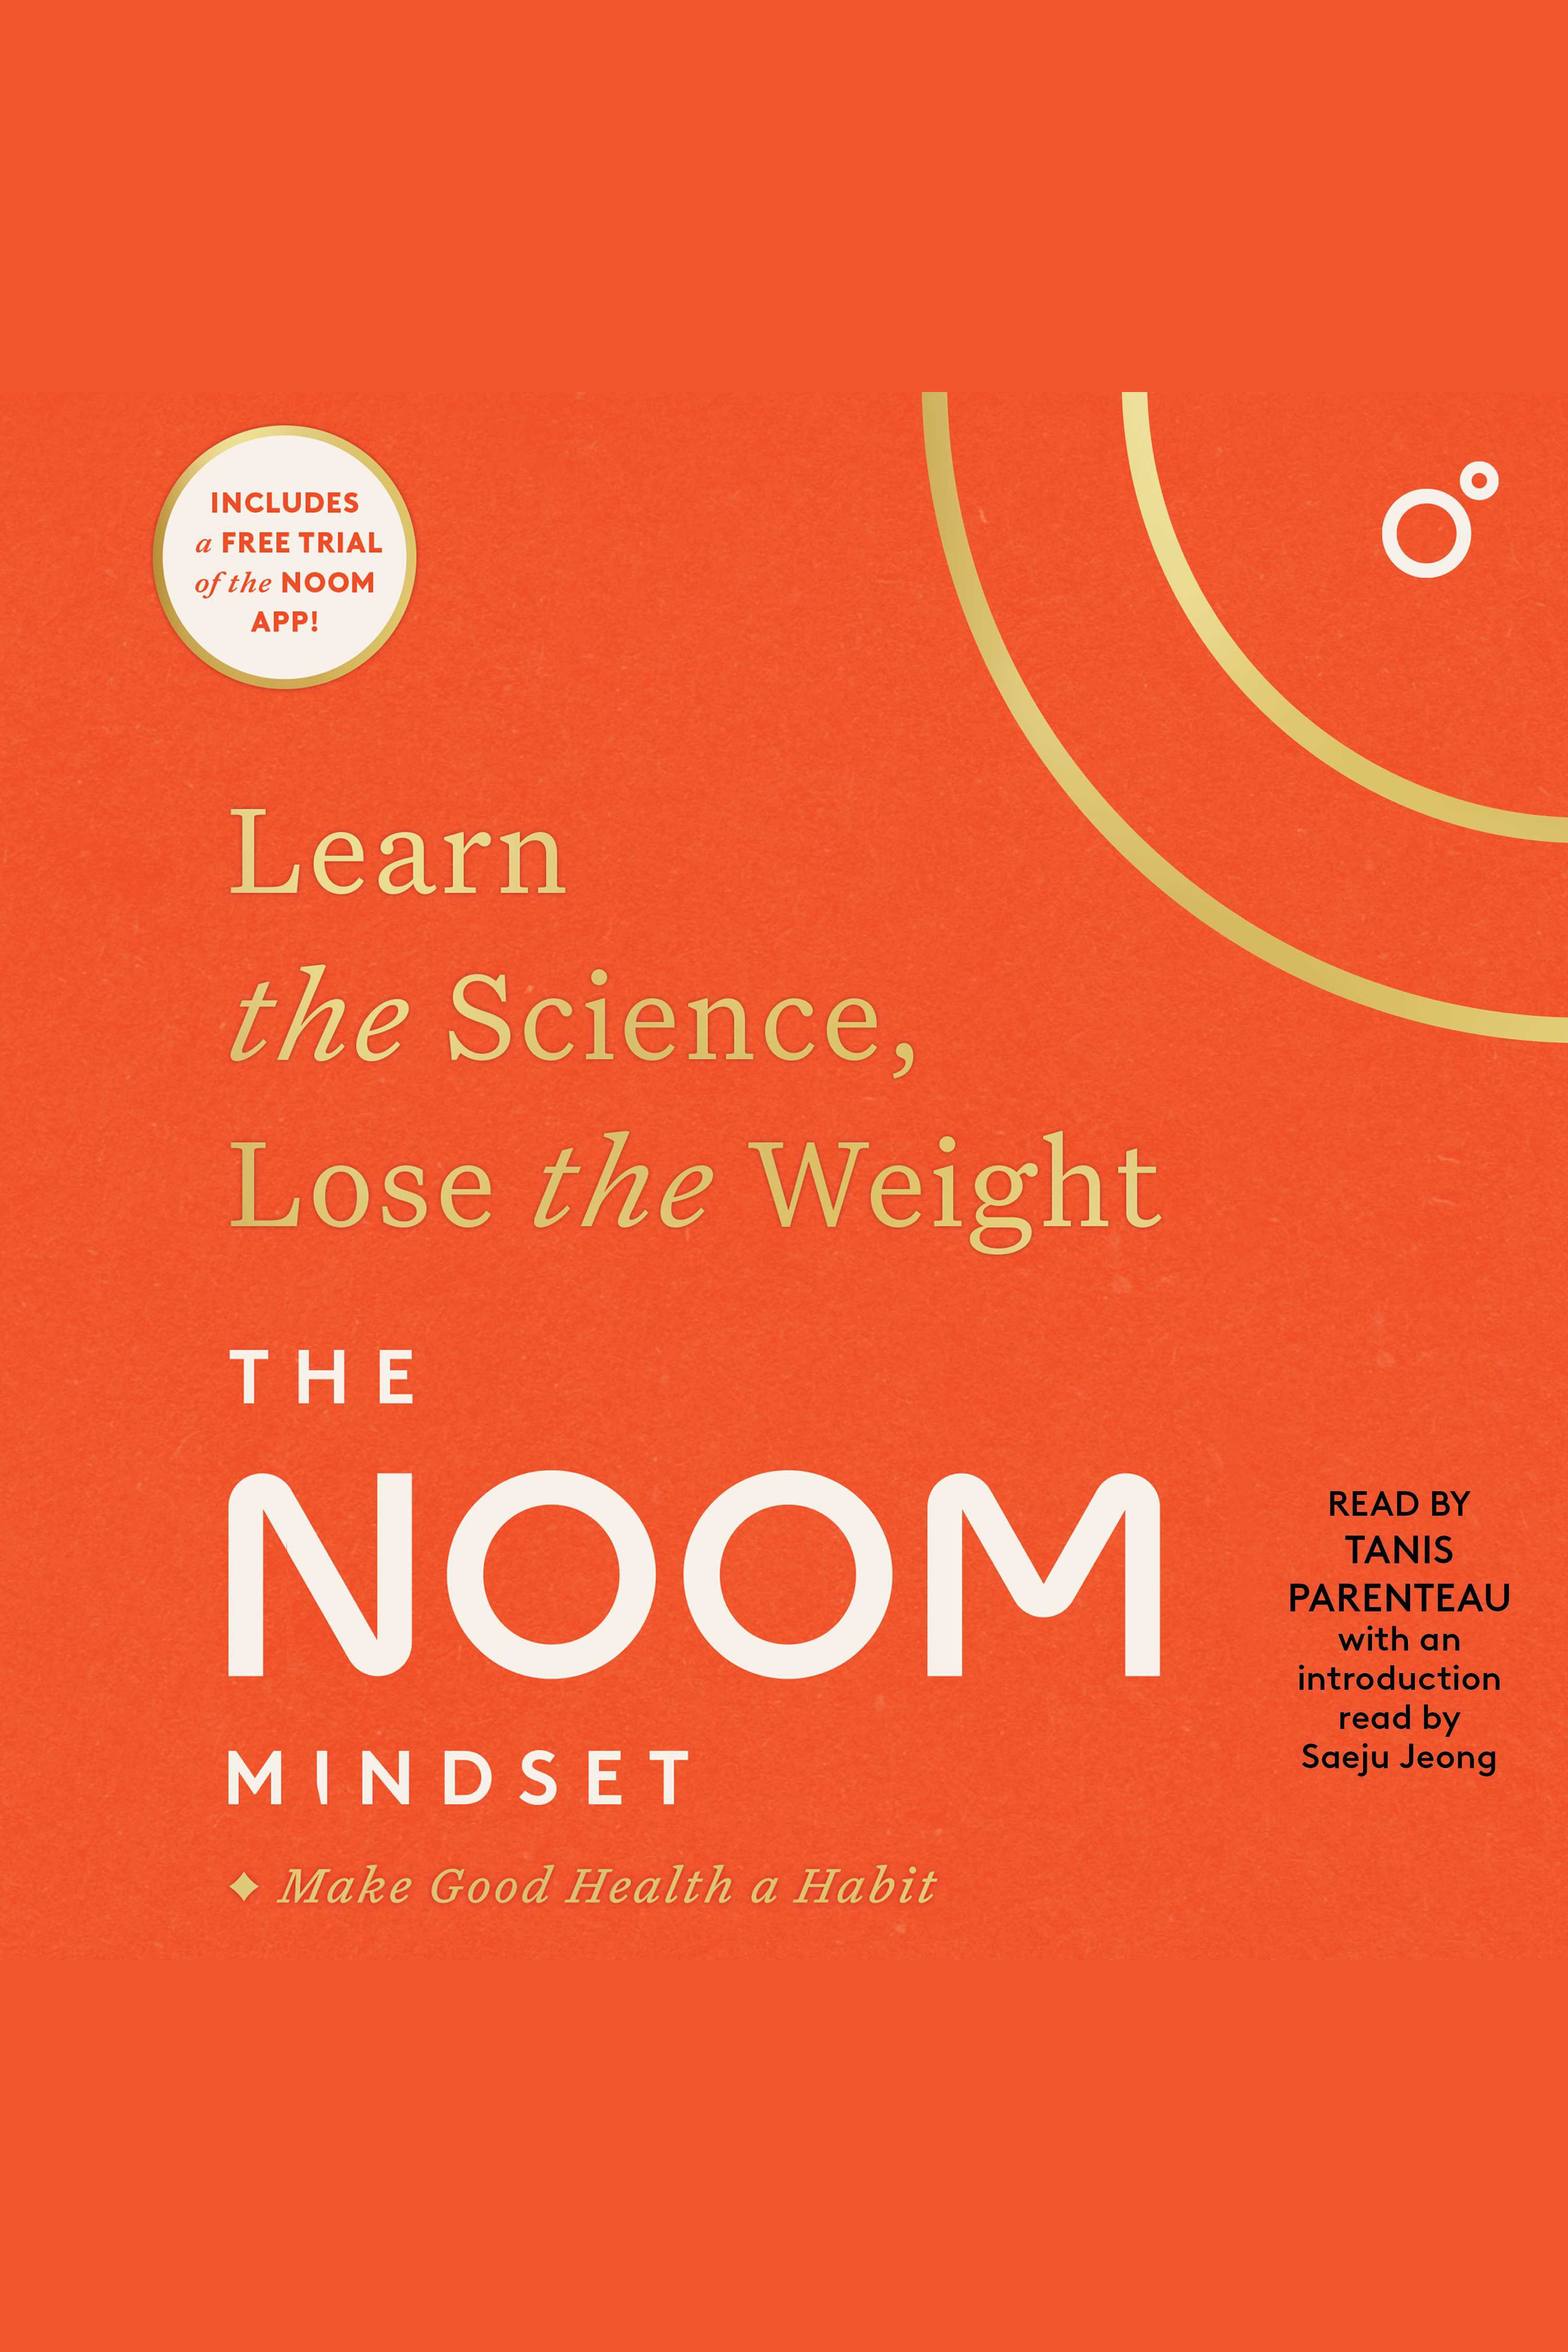 The Noom Mindset Learn the Science, Lose the Weight cover image